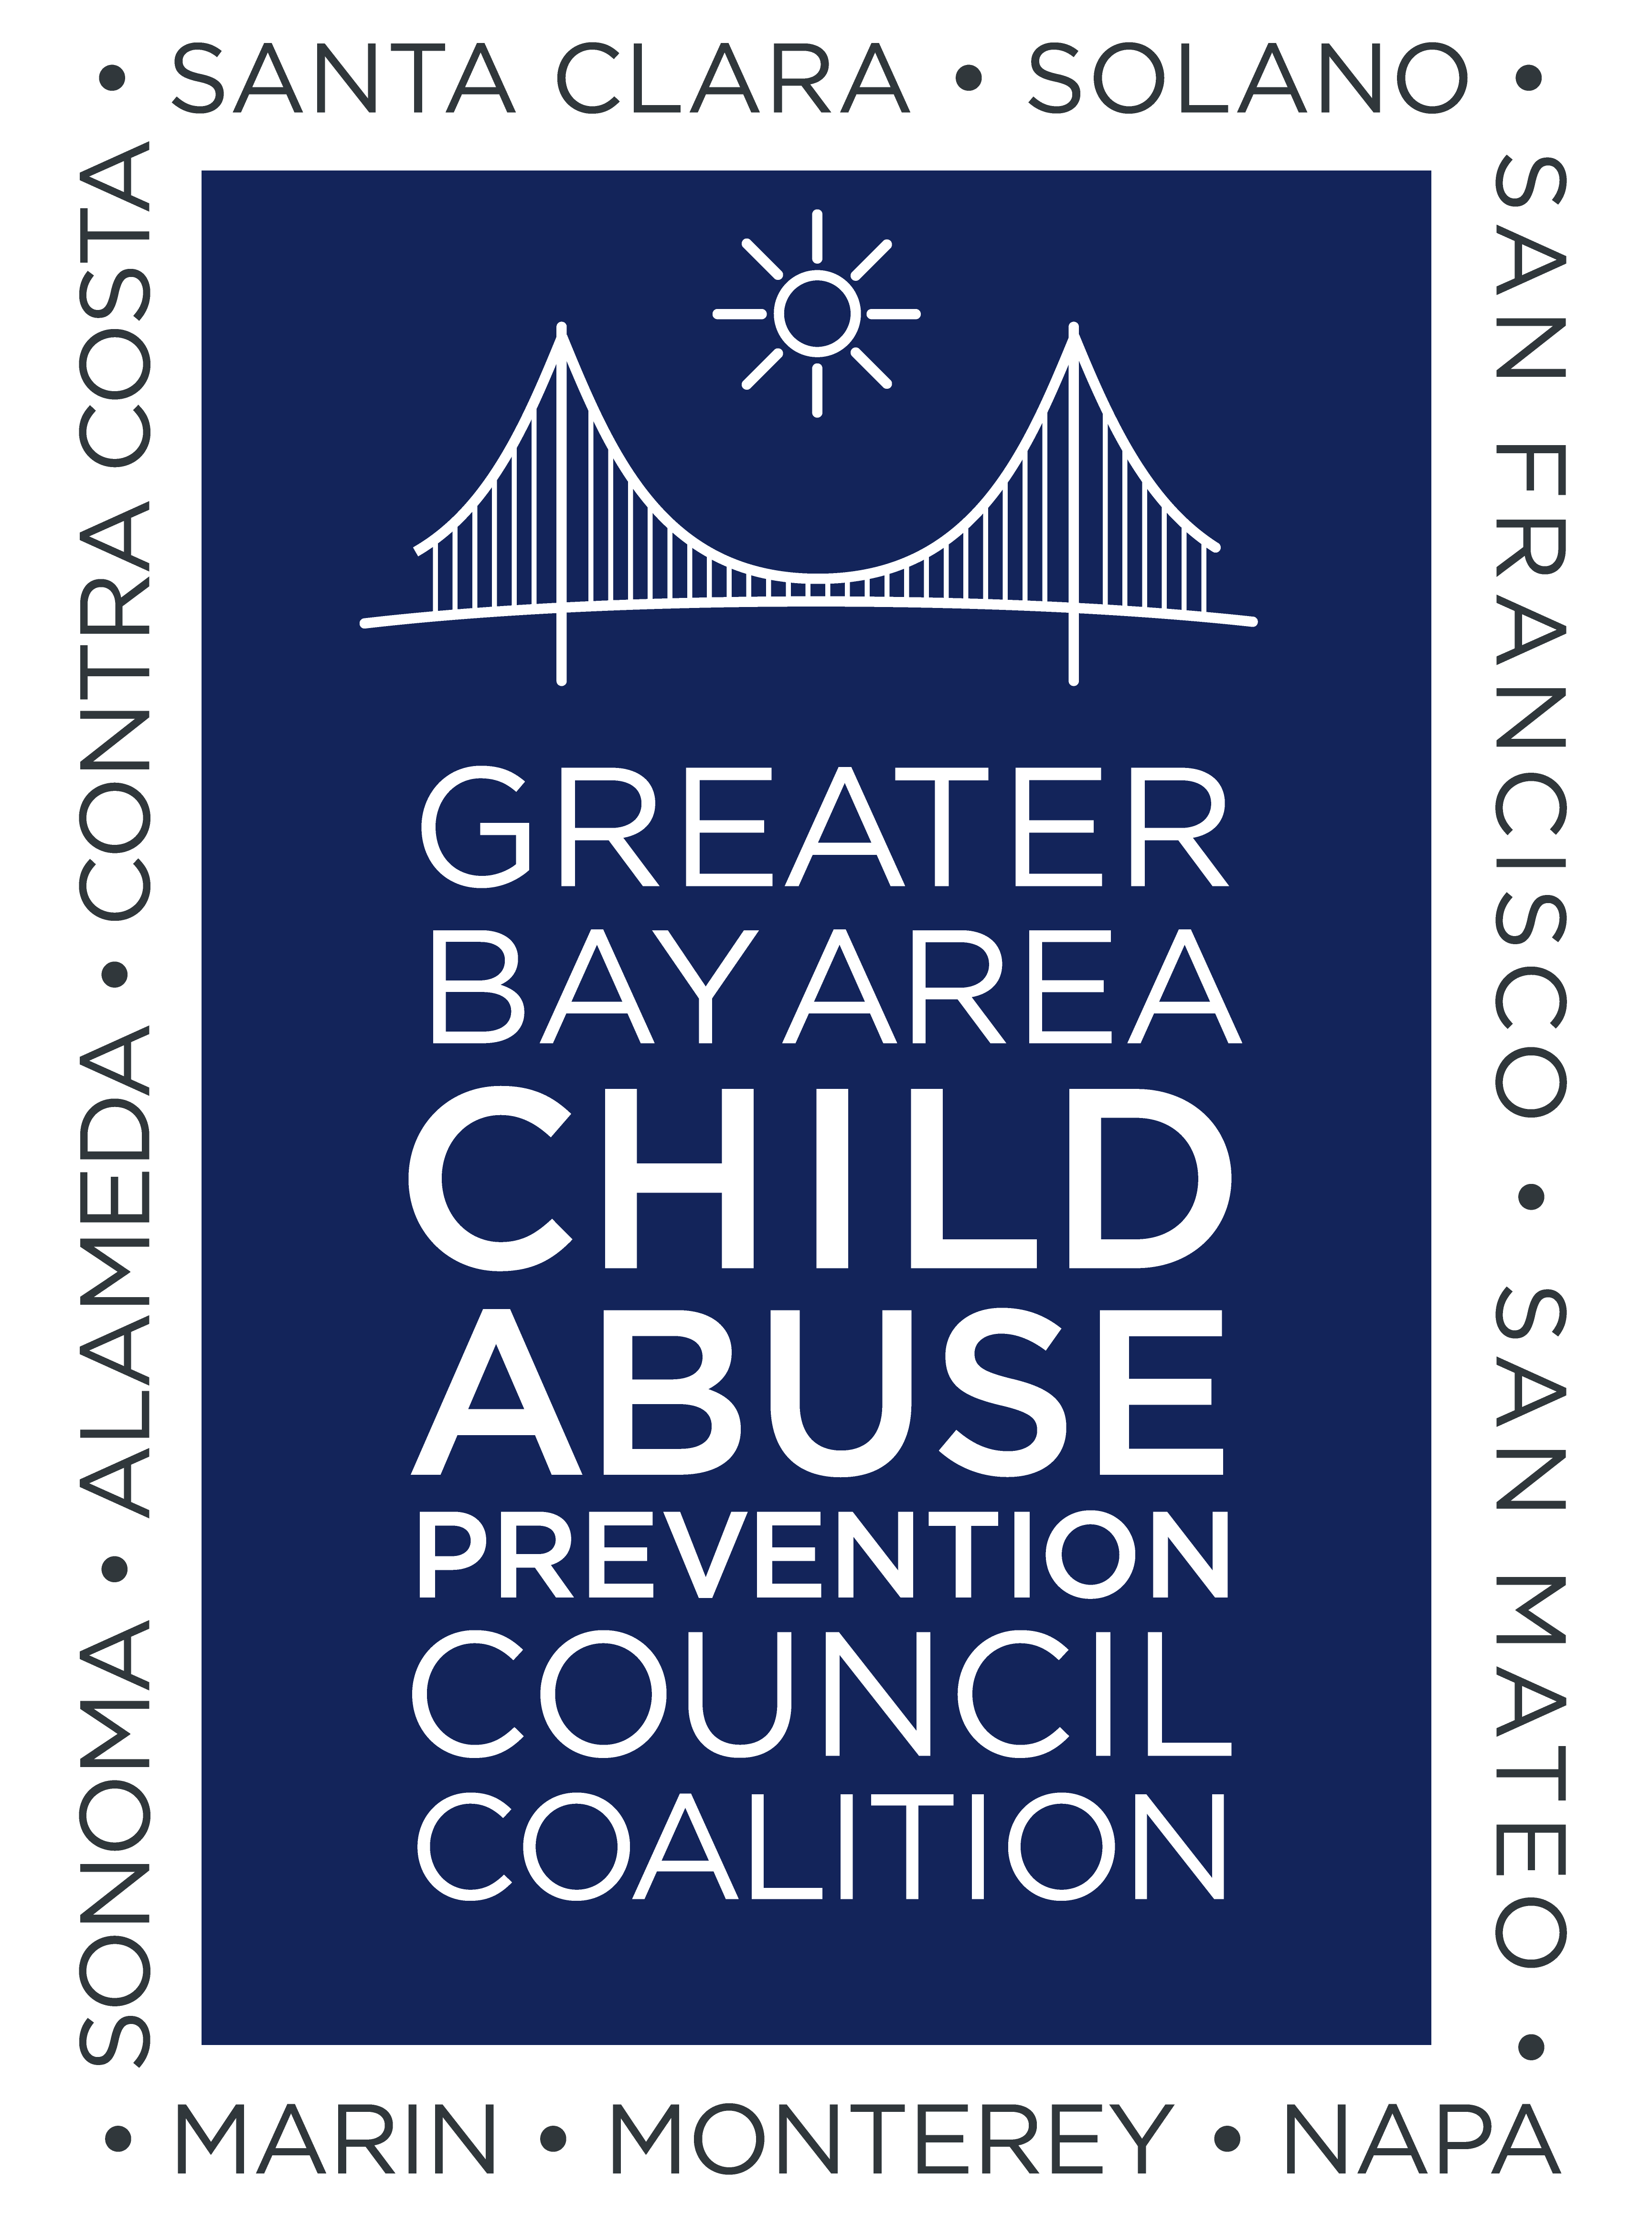 Greater Bay Area Child Abuse Prevention Council Coalition